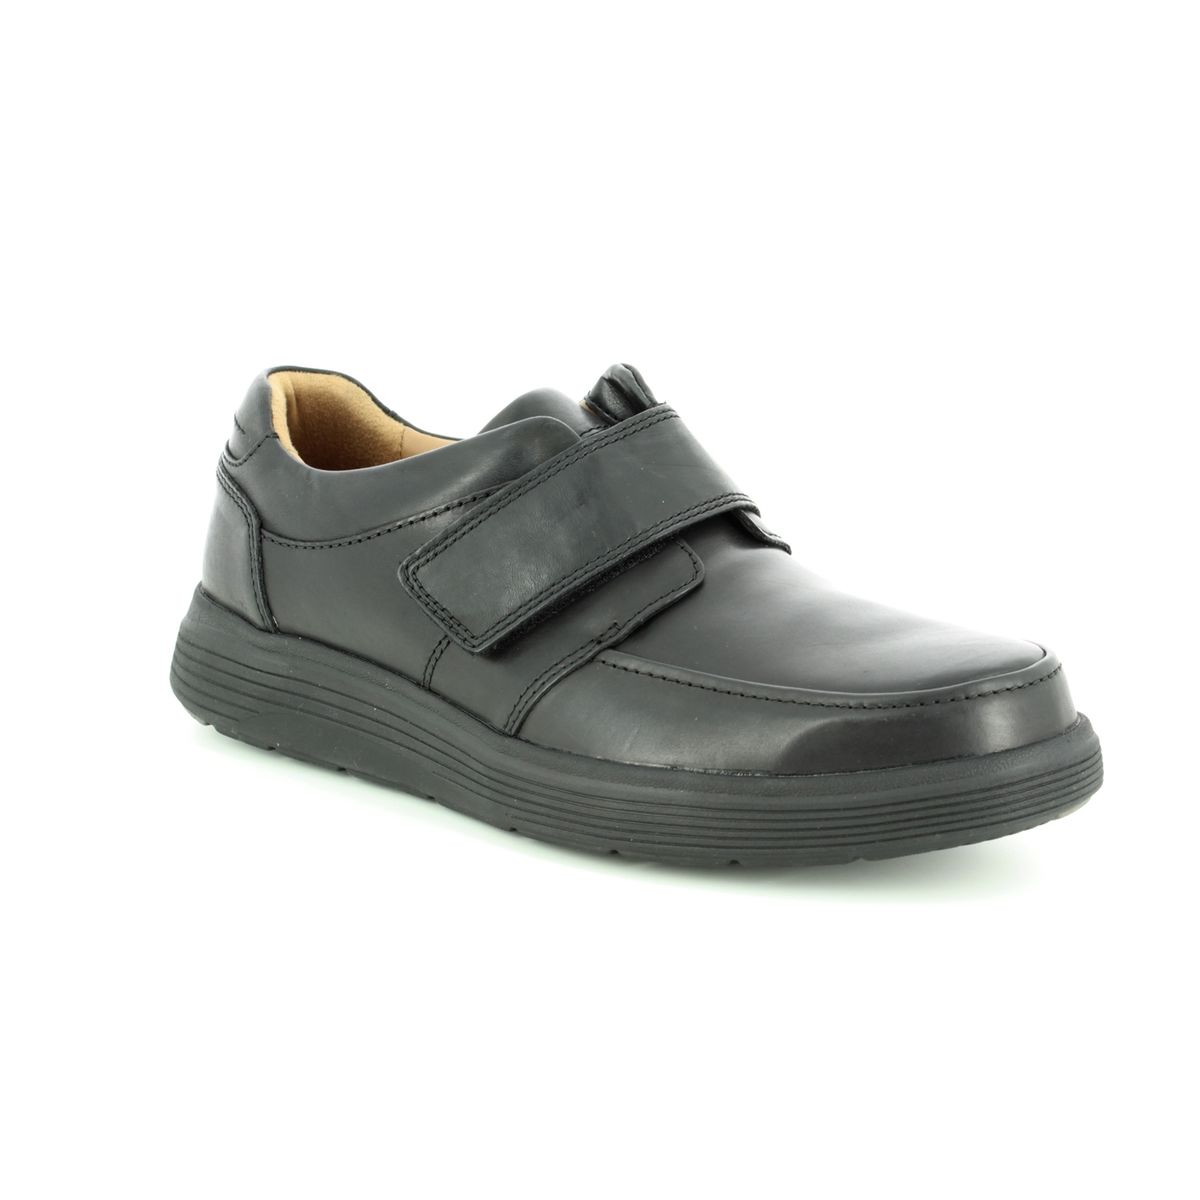 Clarks Un Abode Strap Black Leather Mens Comfort Shoes 3698-68H In Size 7.5 In Plain Black Leather H Width Fitting Extra Wide